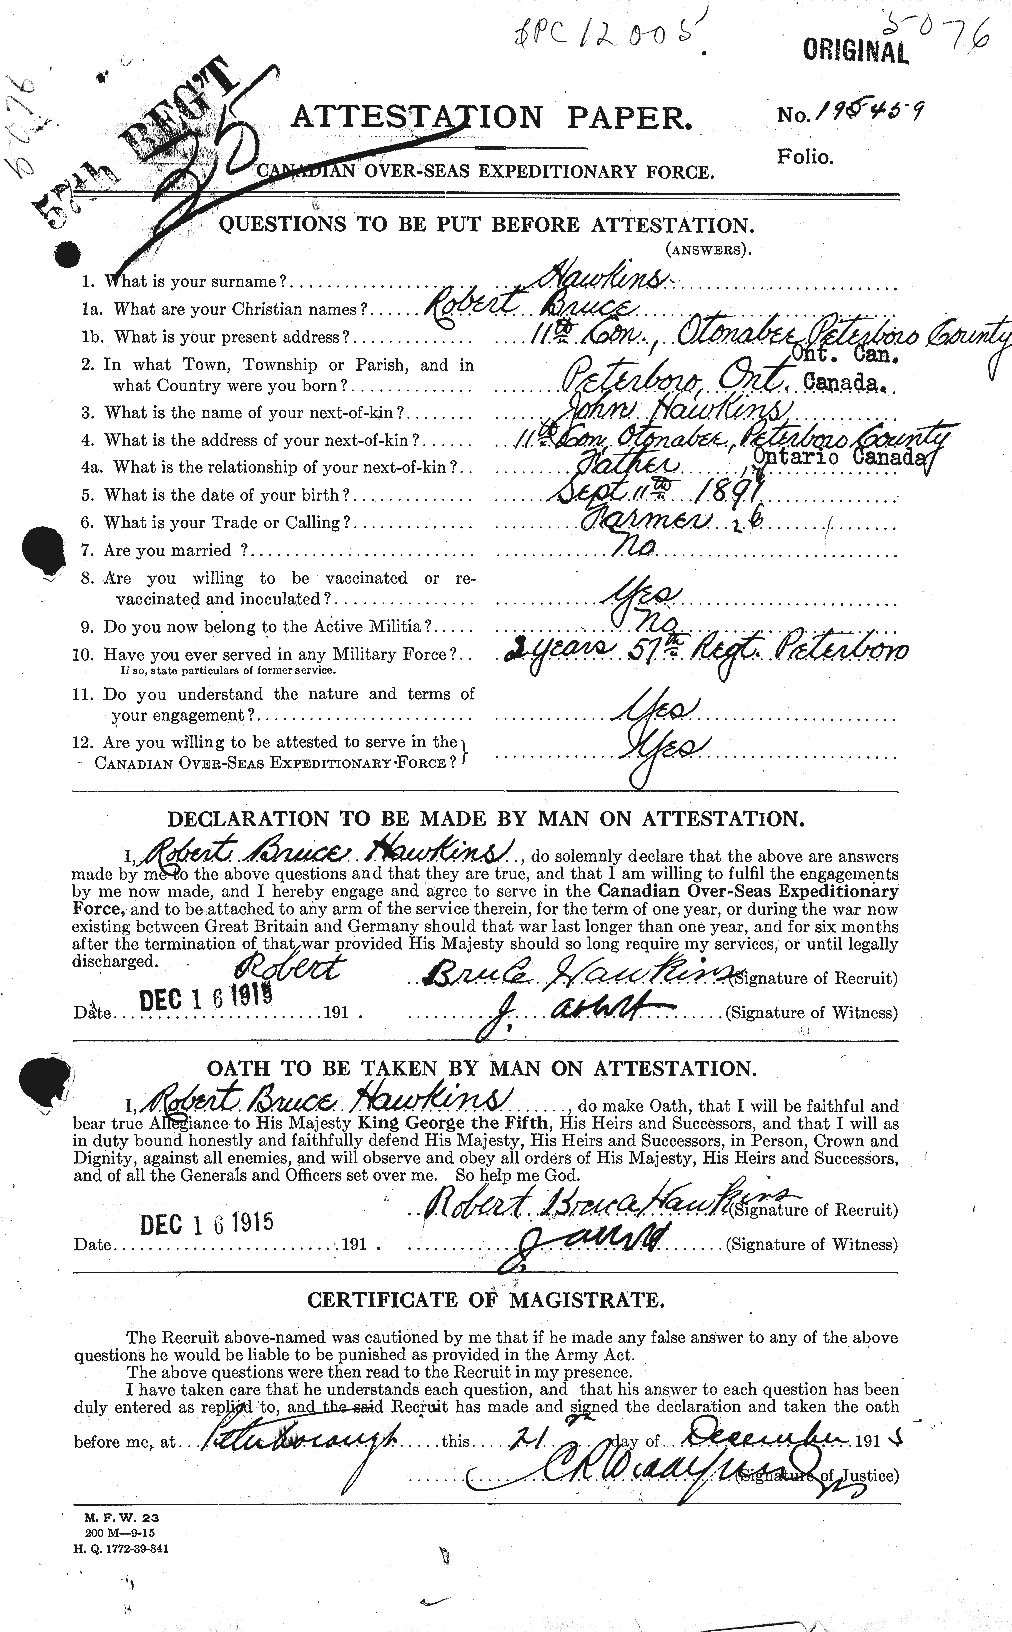 Personnel Records of the First World War - CEF 385594a